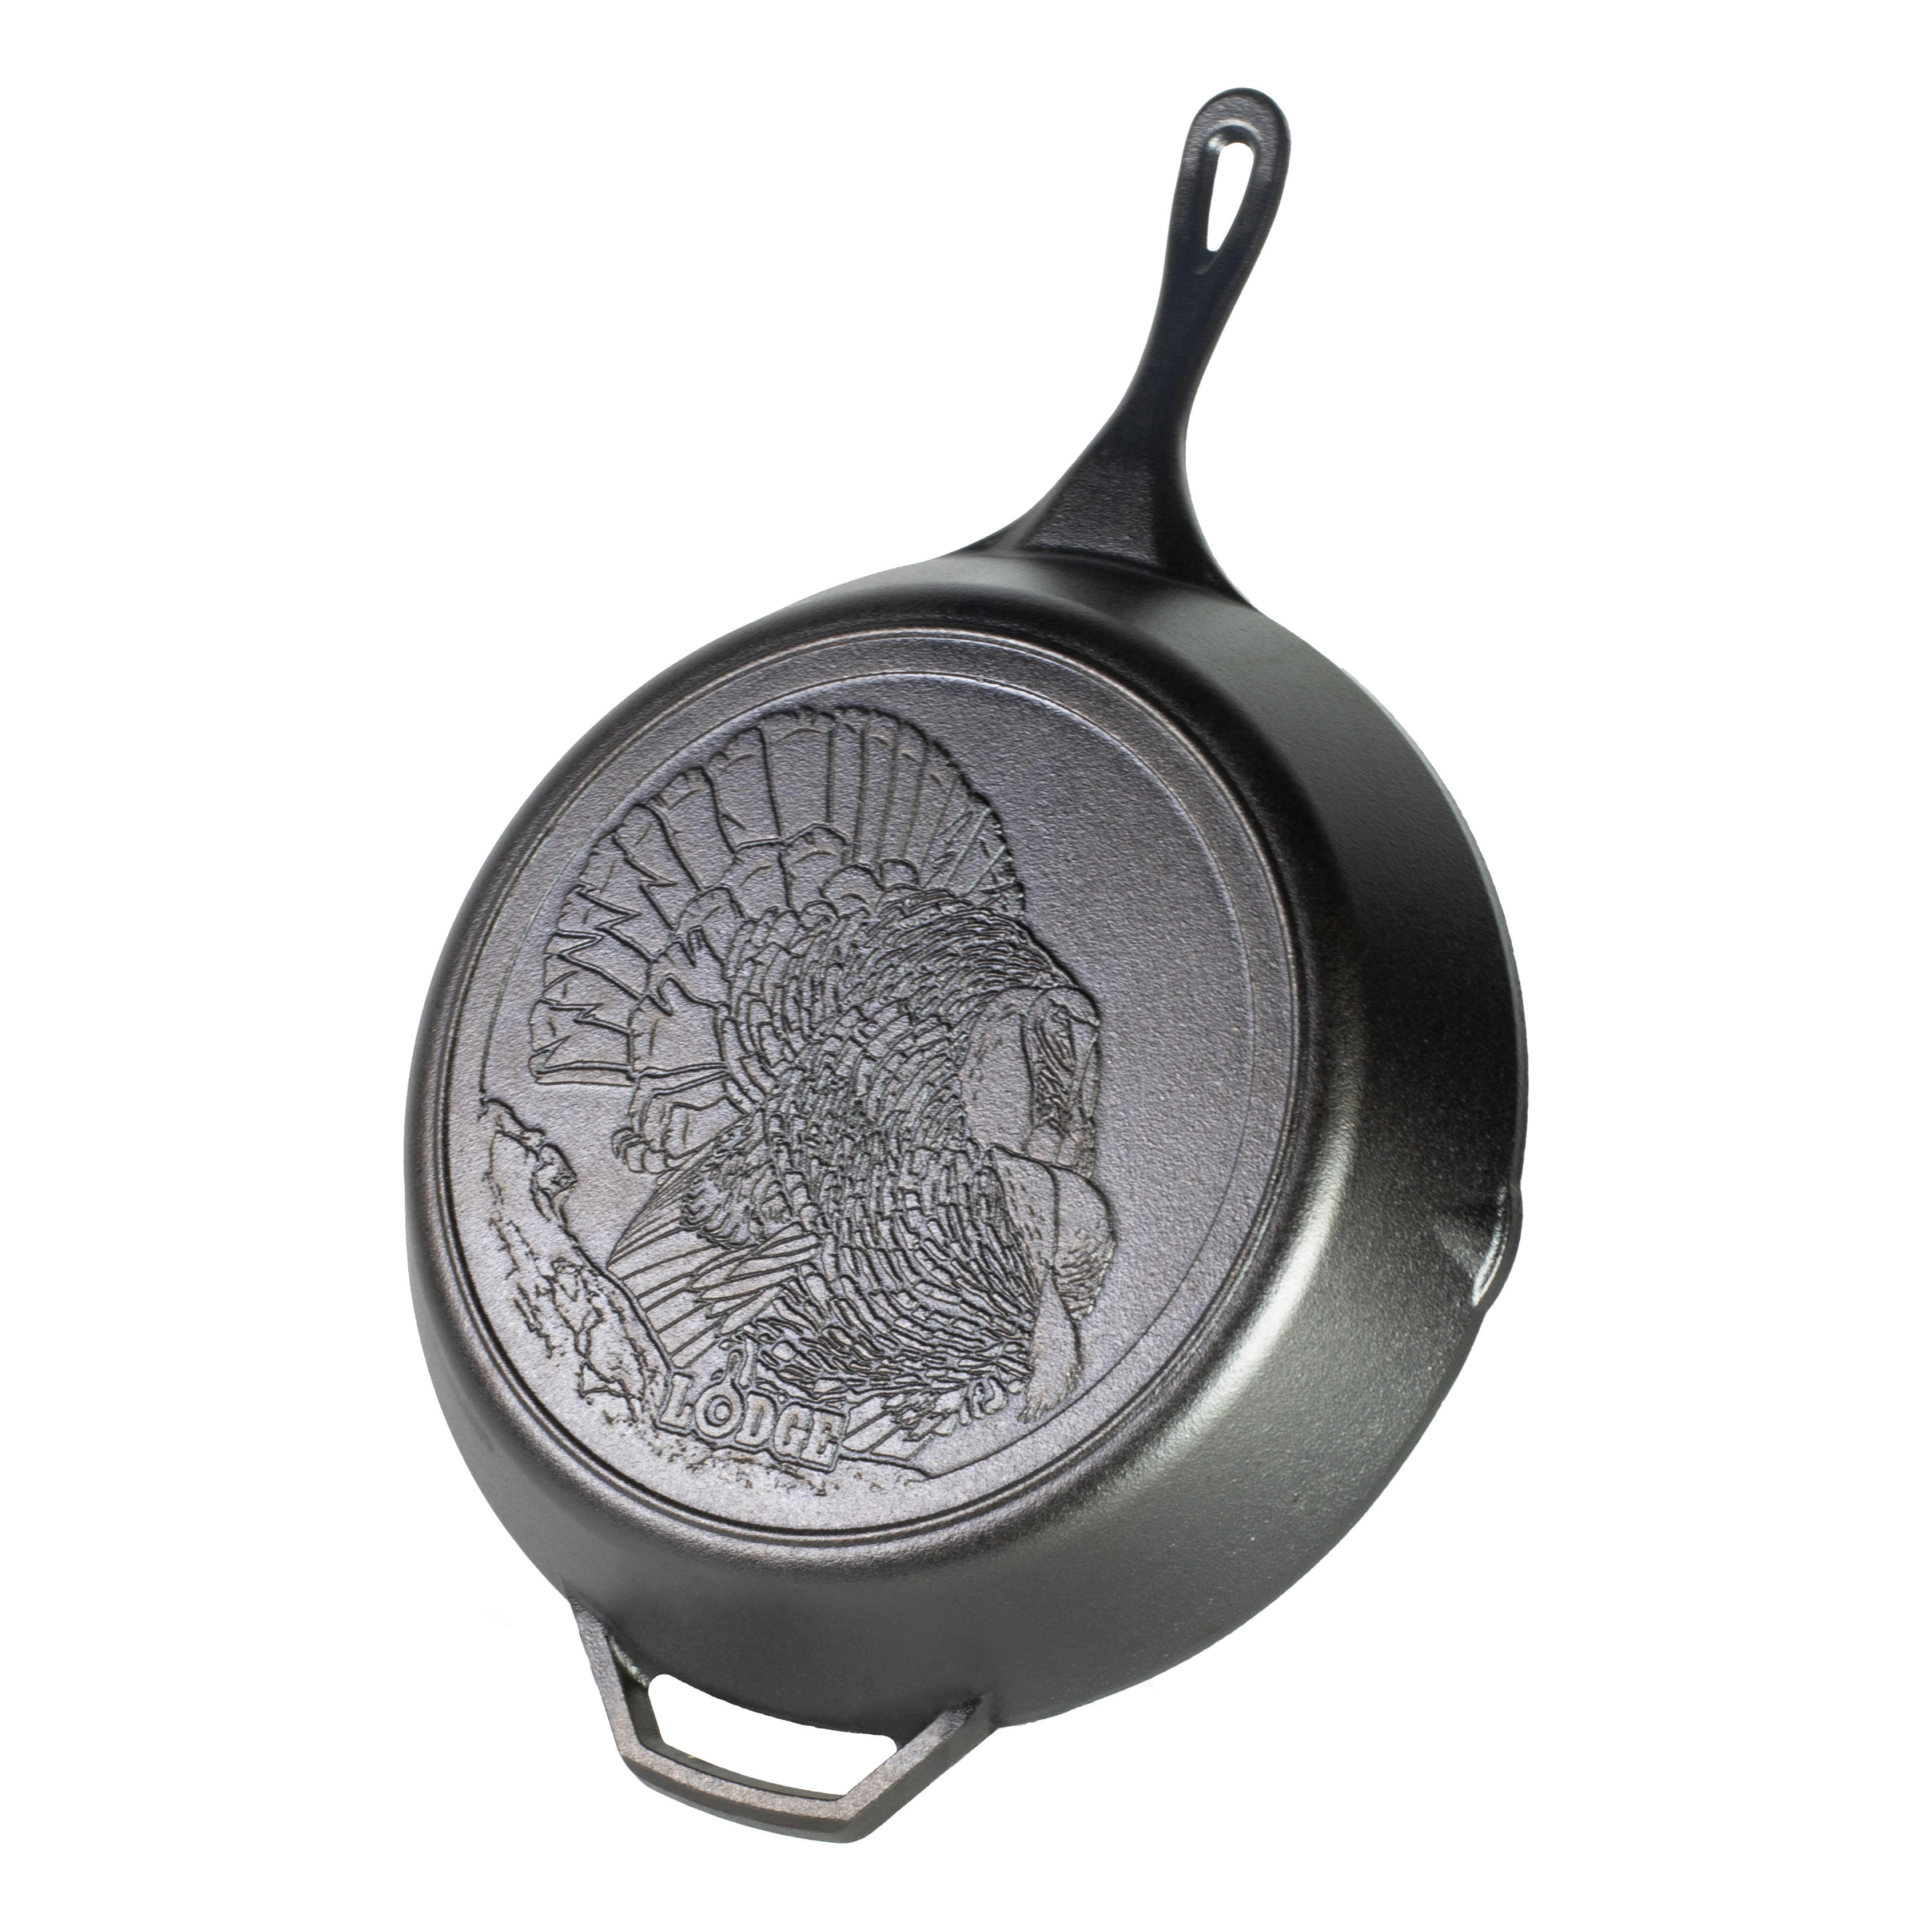 Cabela's Outfitter Series Cast-Iron Skillet